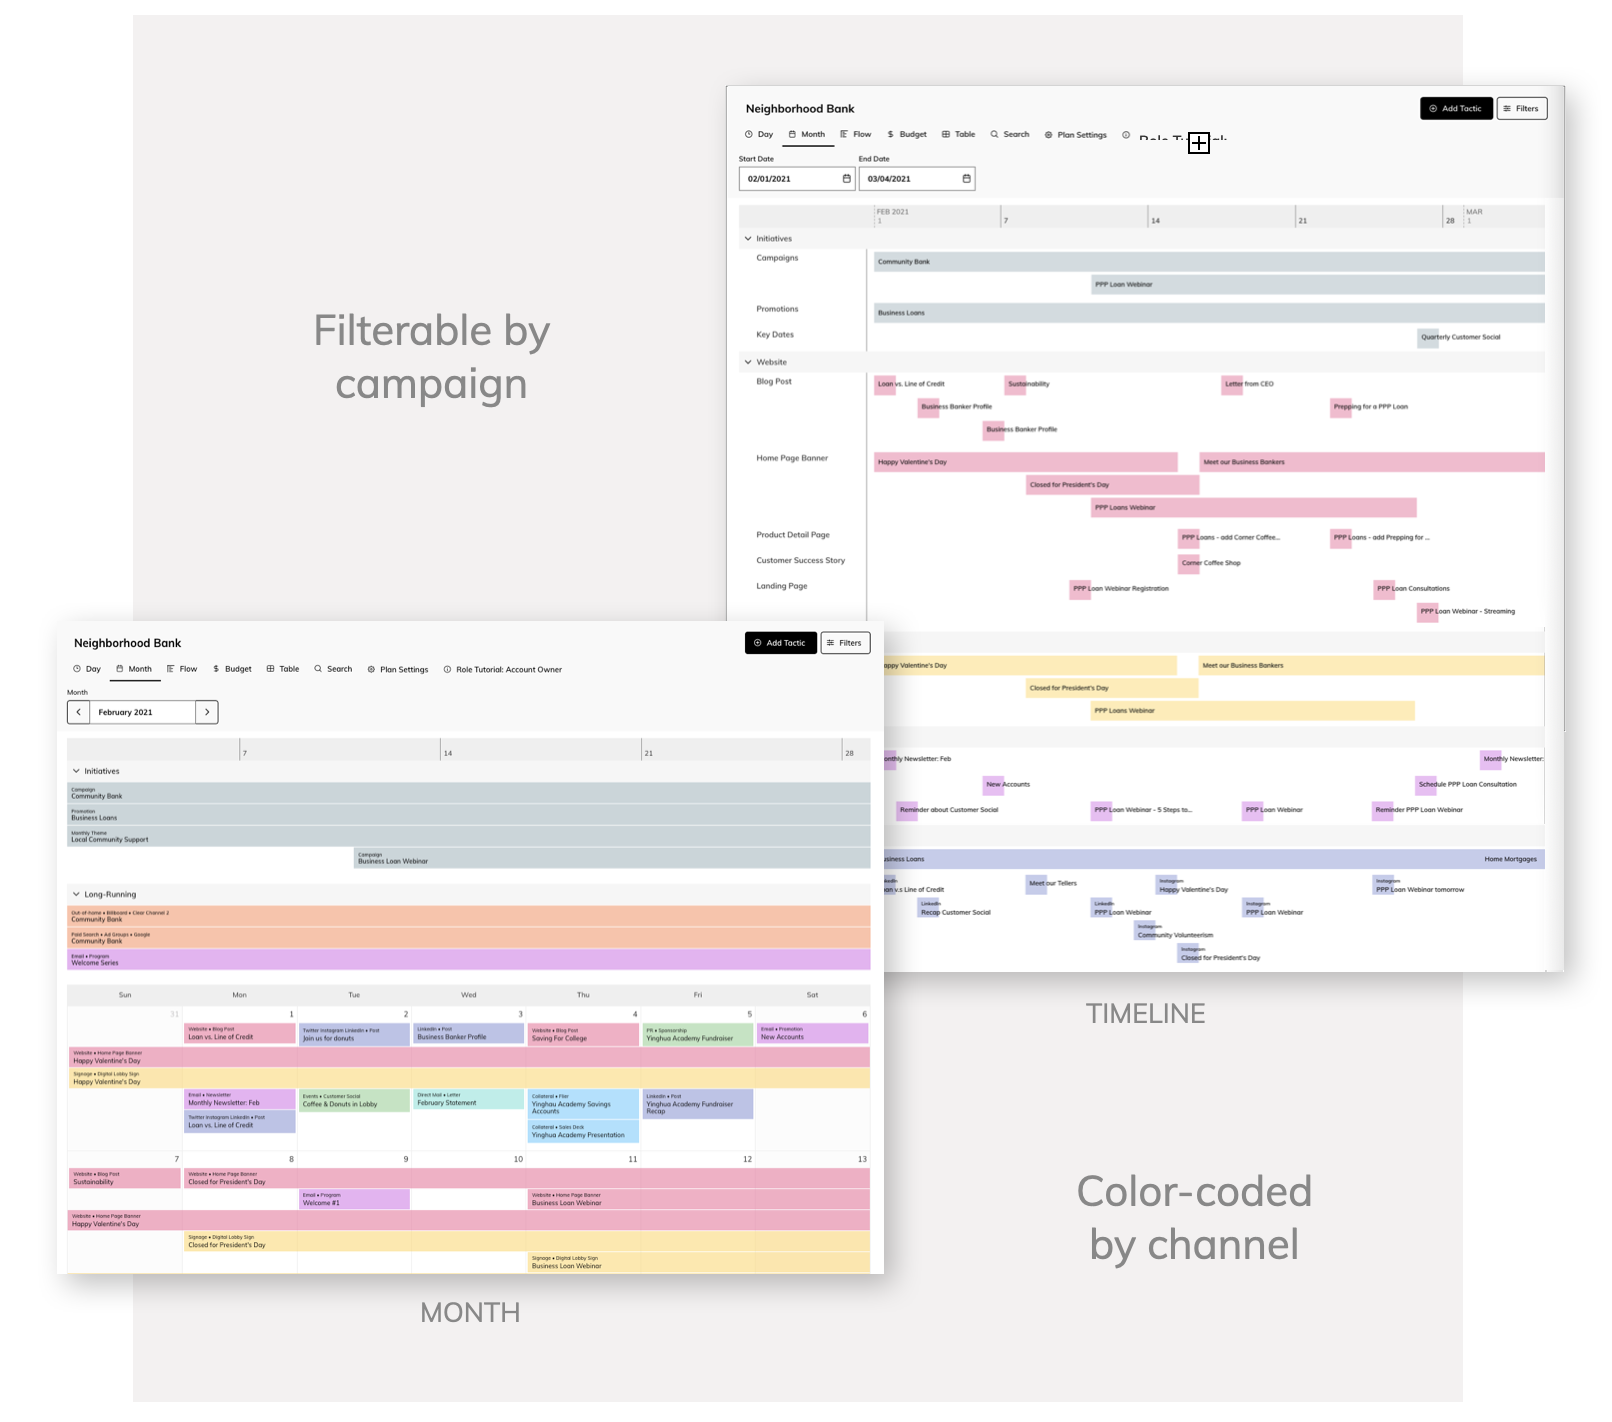 Month and timeline view of Annum's integrated marketing planning calendar